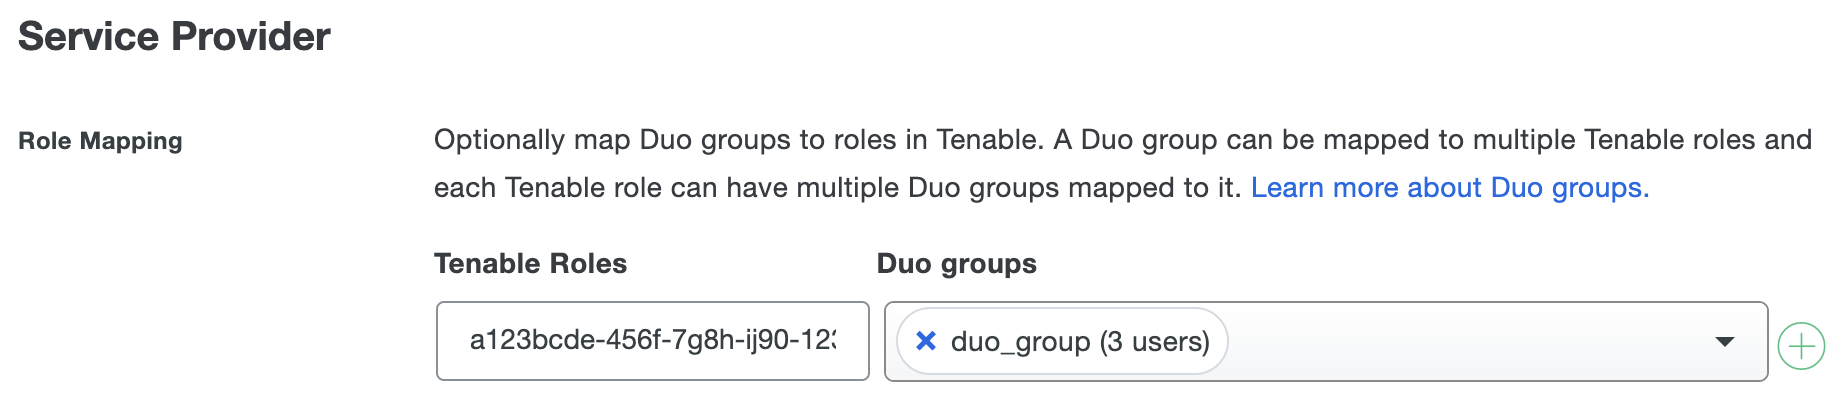 Duo Tenable Role Mapping Fields